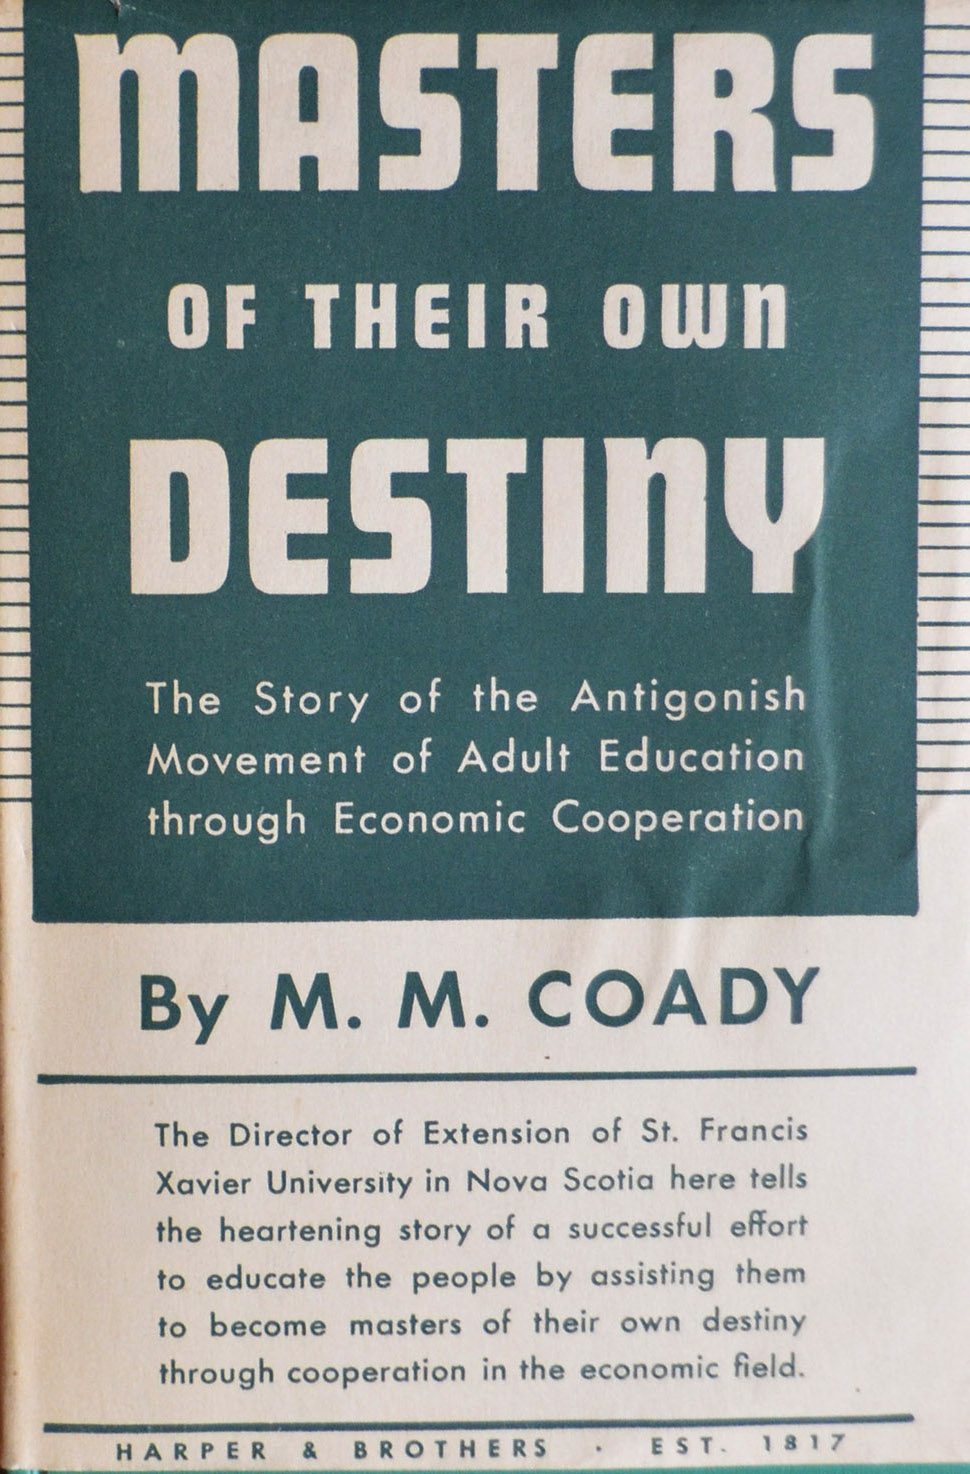 Cover of a book titled "Masters of their own Destiny: The story of the Antigonish movement of Adult Education thought Economic Cooperation" by Father M.M. Coady